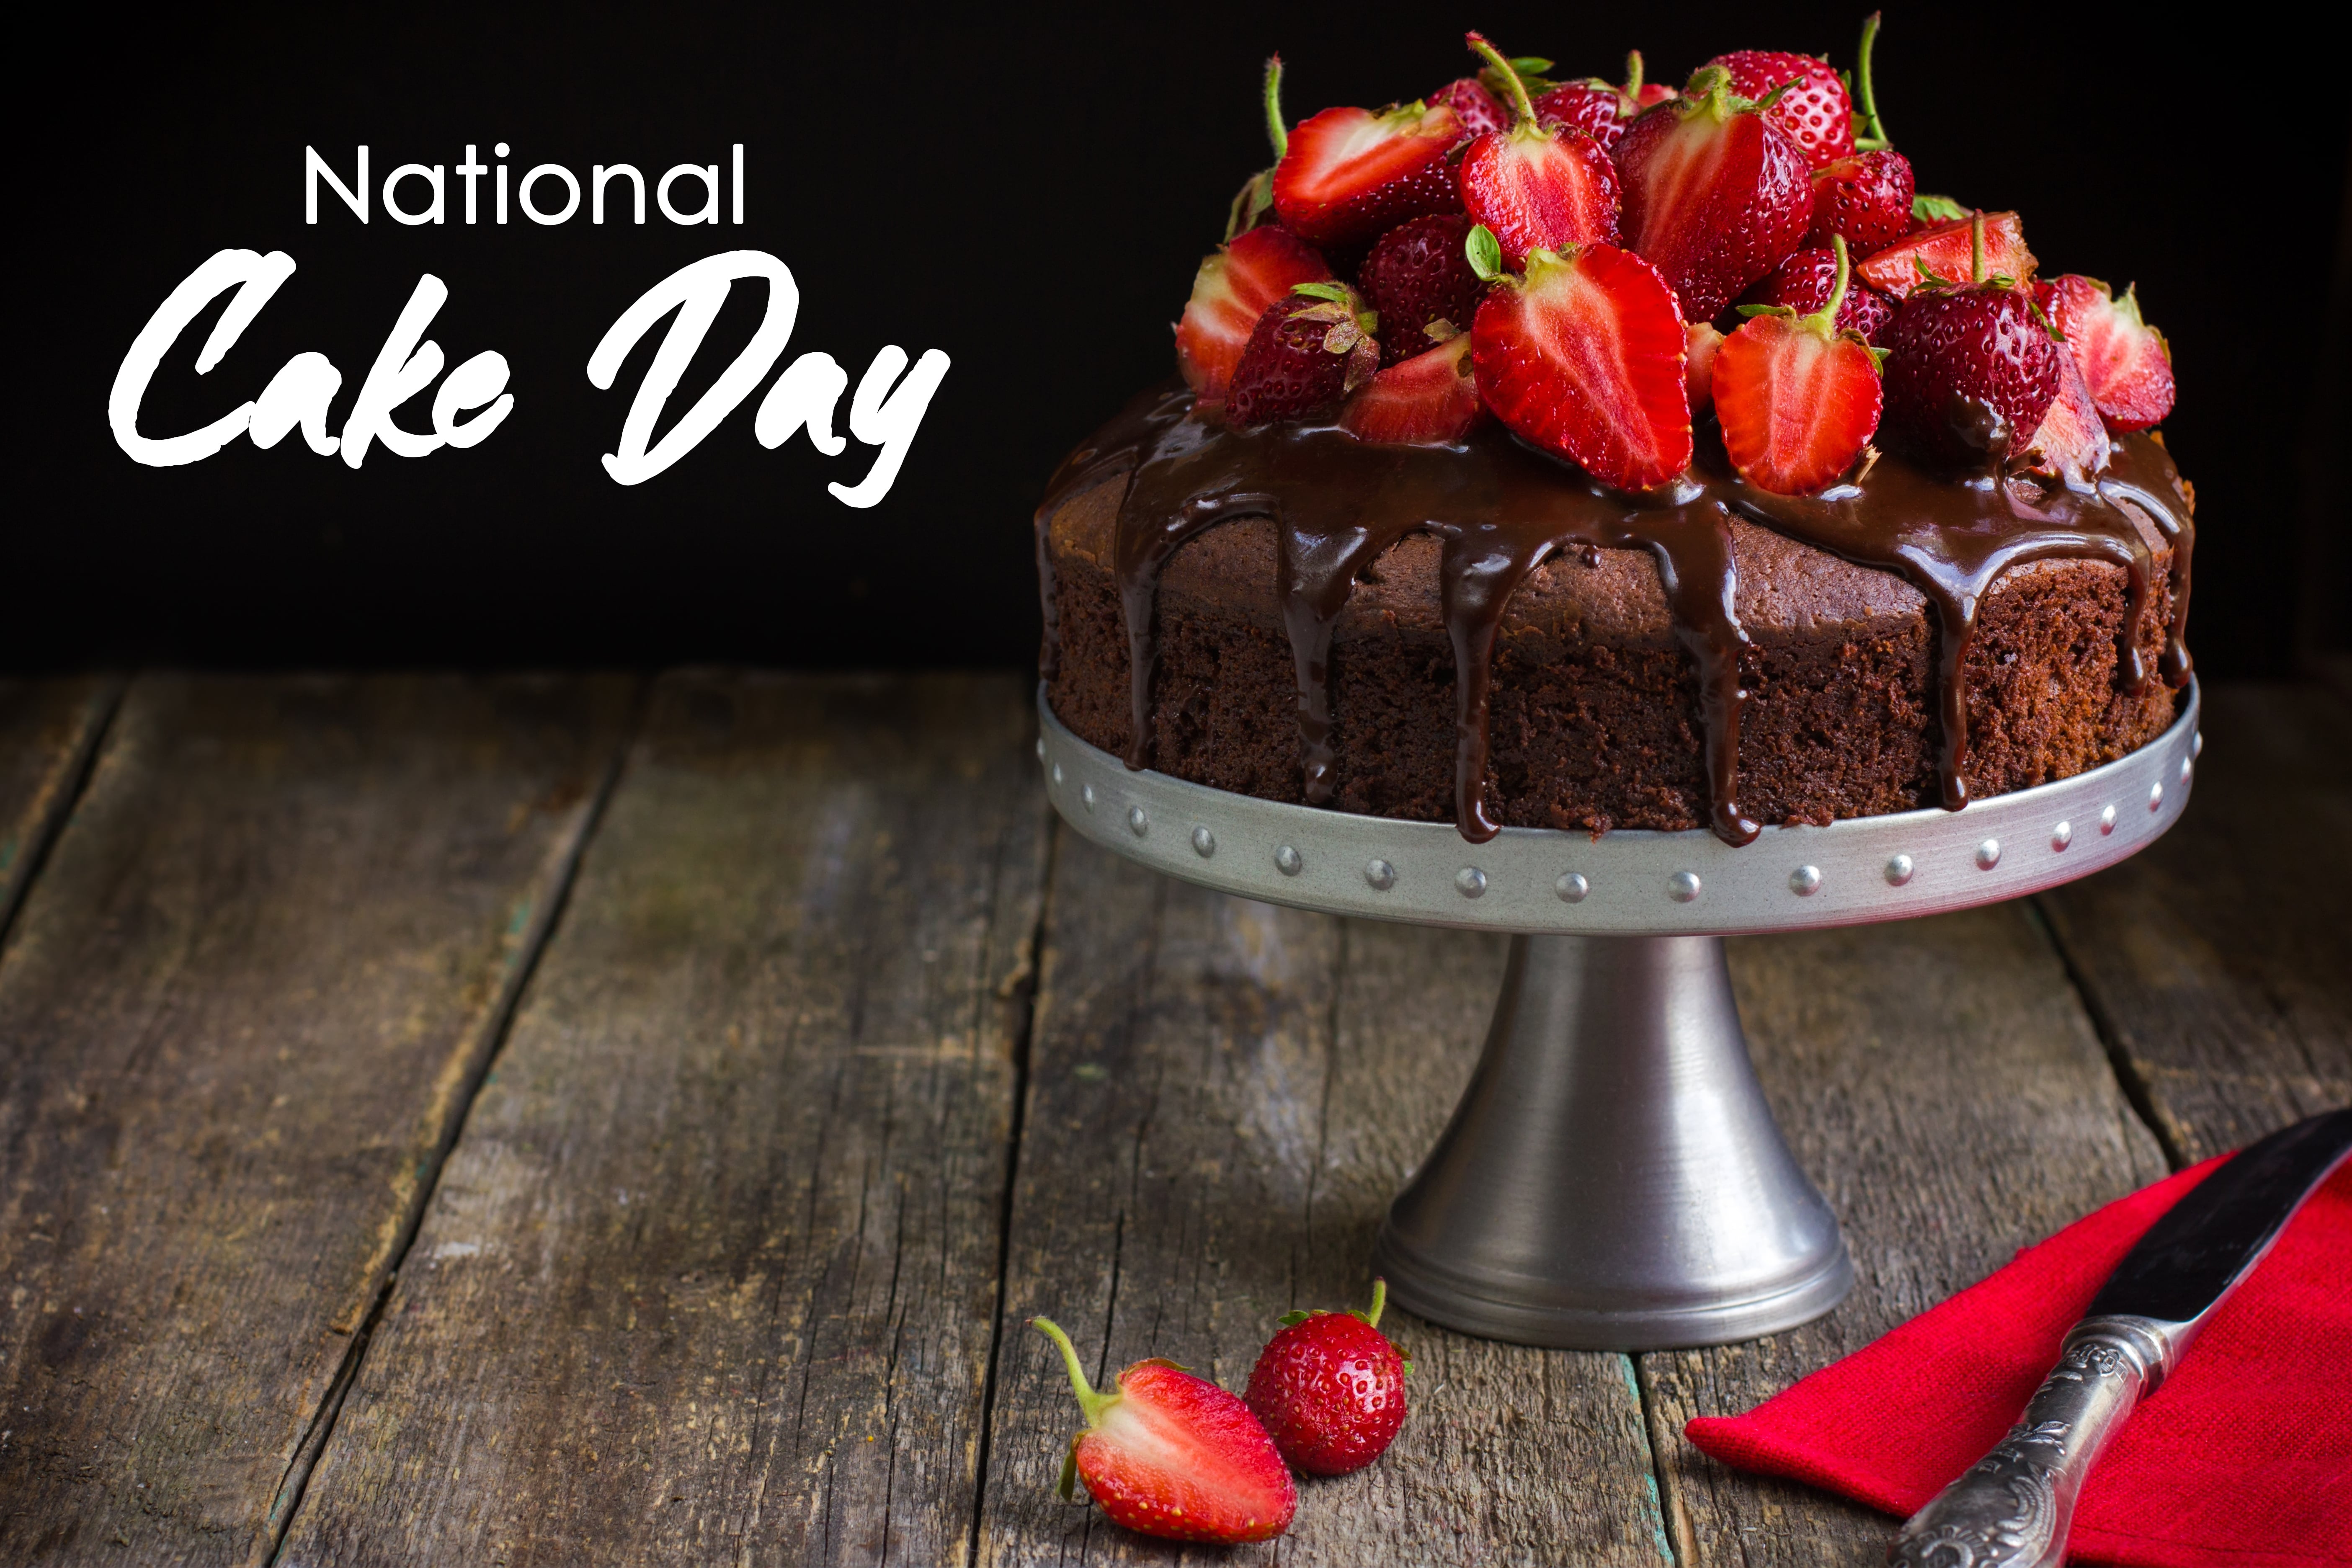 National Cake Day â€“ Insurance Centers of America